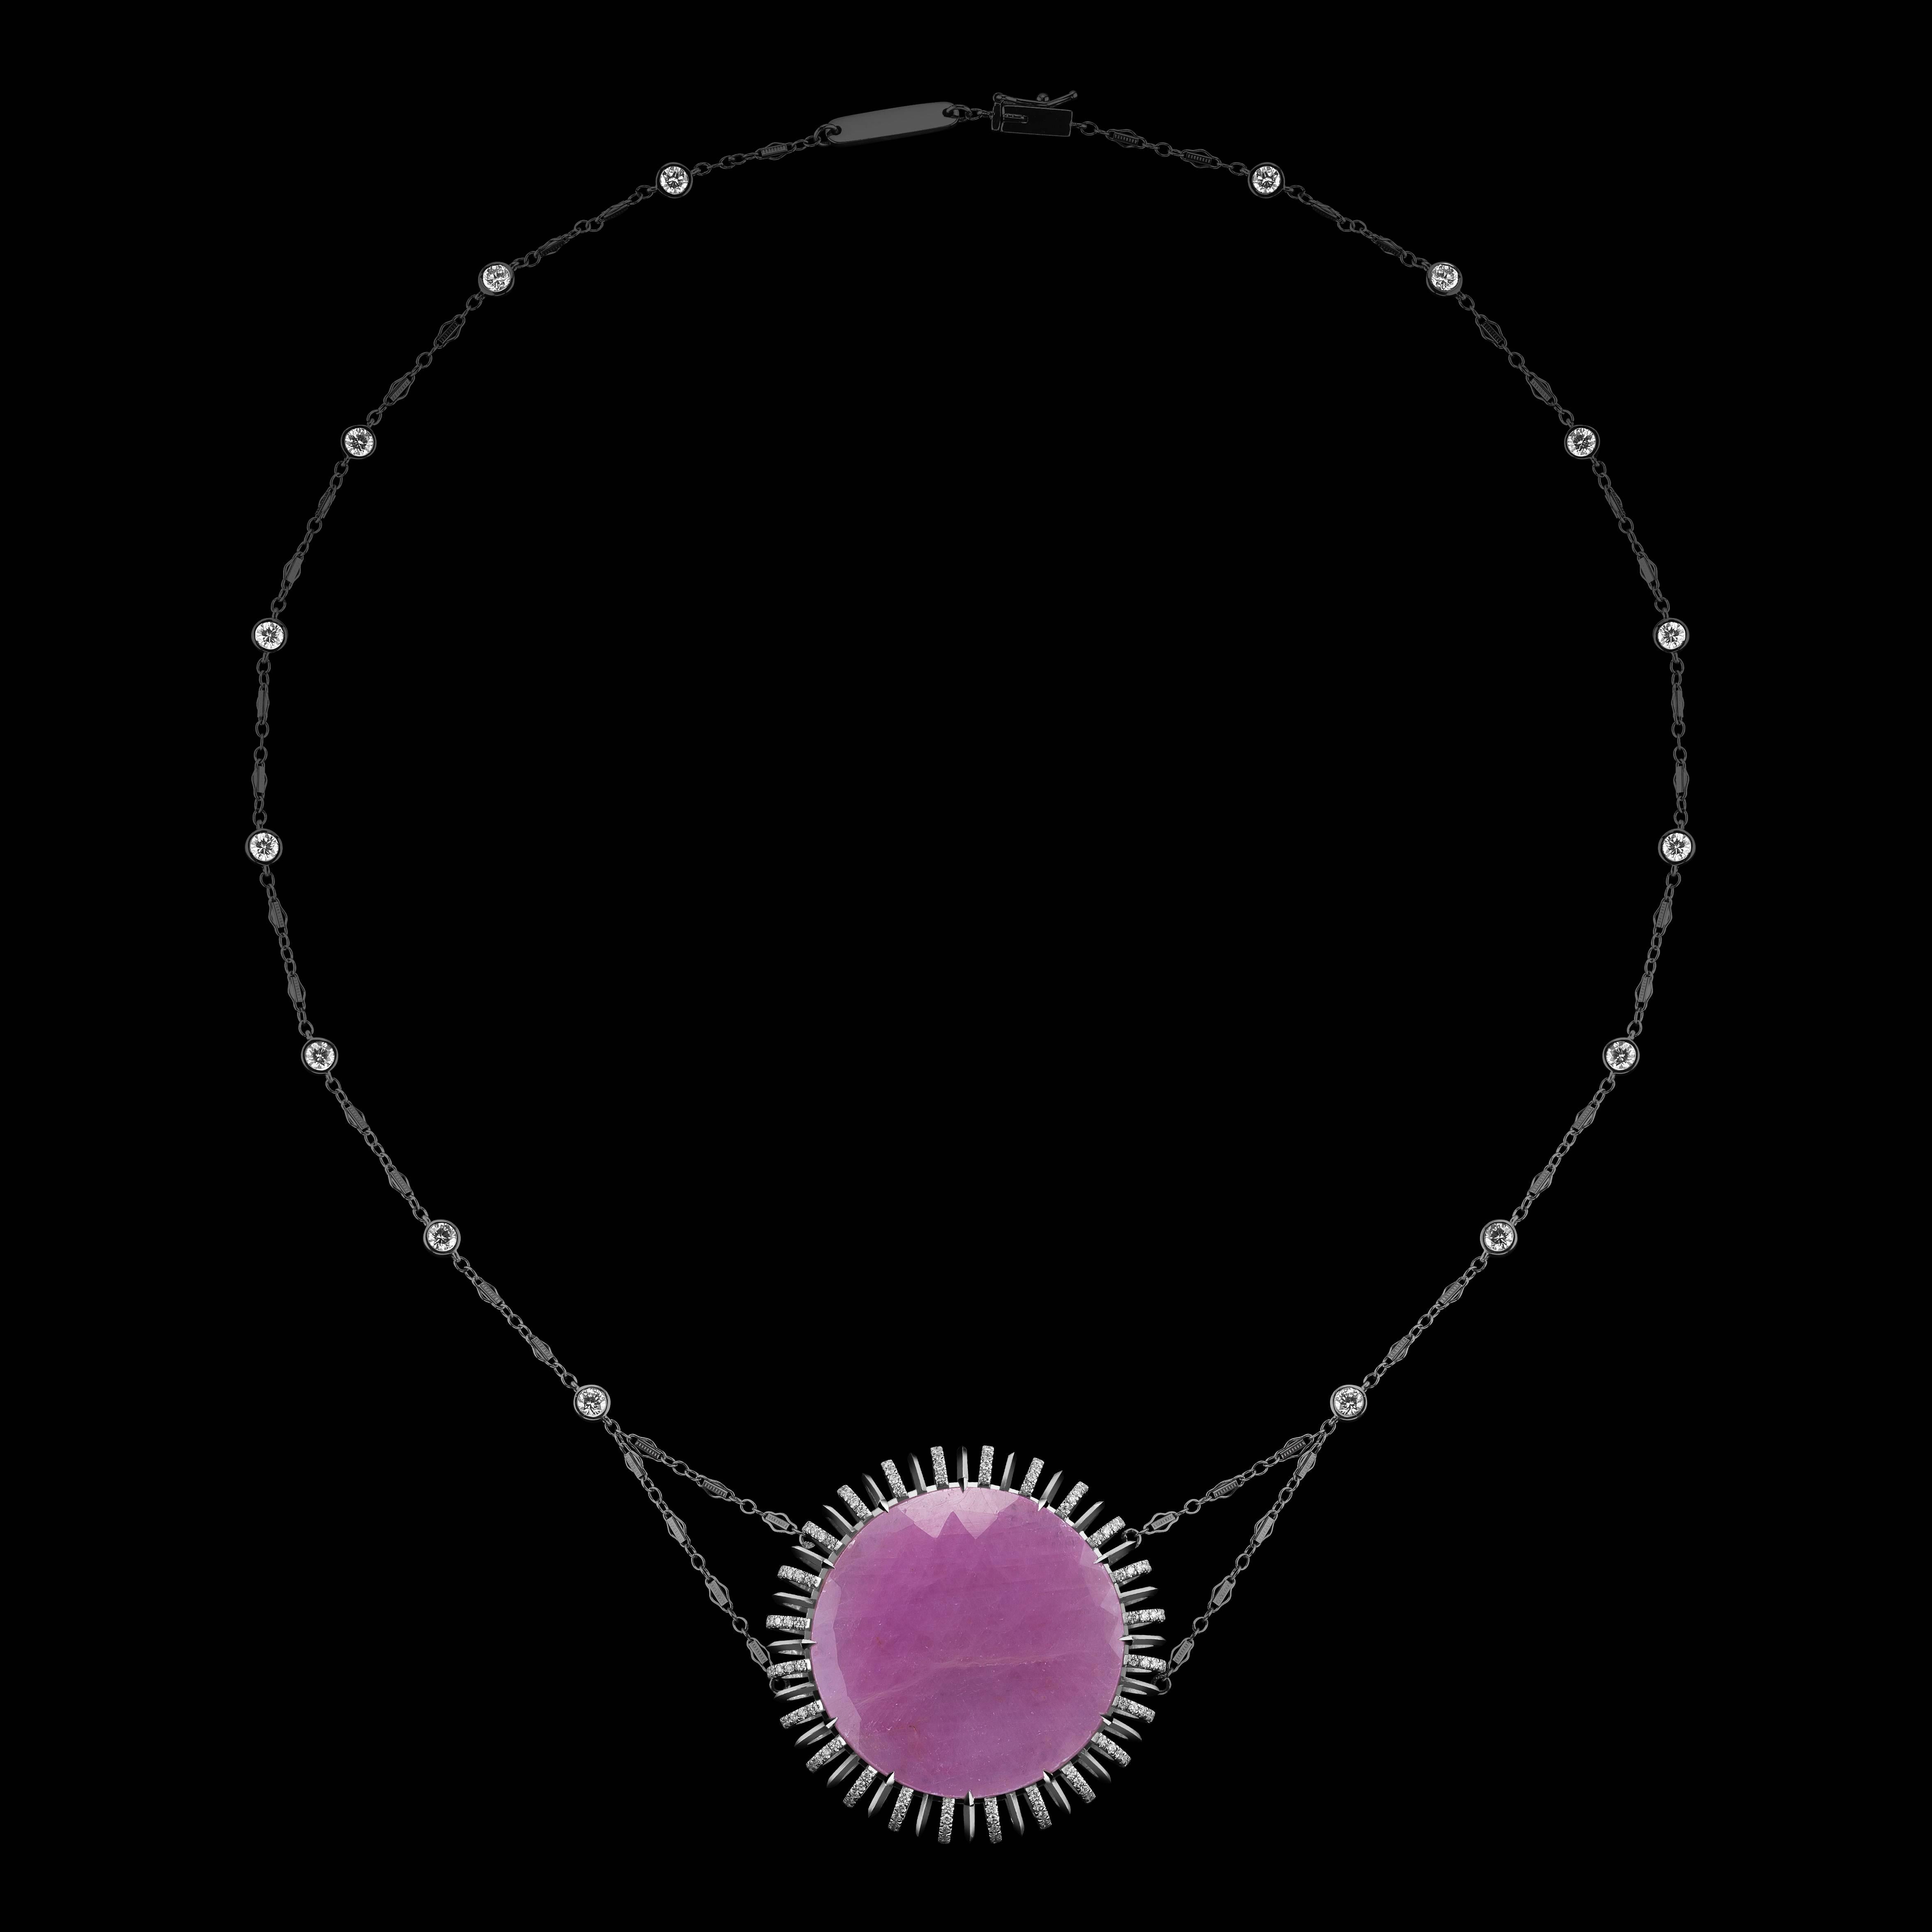 *Please contact us for more information on this piece or on creating your own custom Alexandra Mor Design. 

A one-of-a-kind Alexandra Mor slice pendant necklace features a 42.76 carat 
Pink Sapphire detailed with Alexandra Mor signature knife-edged